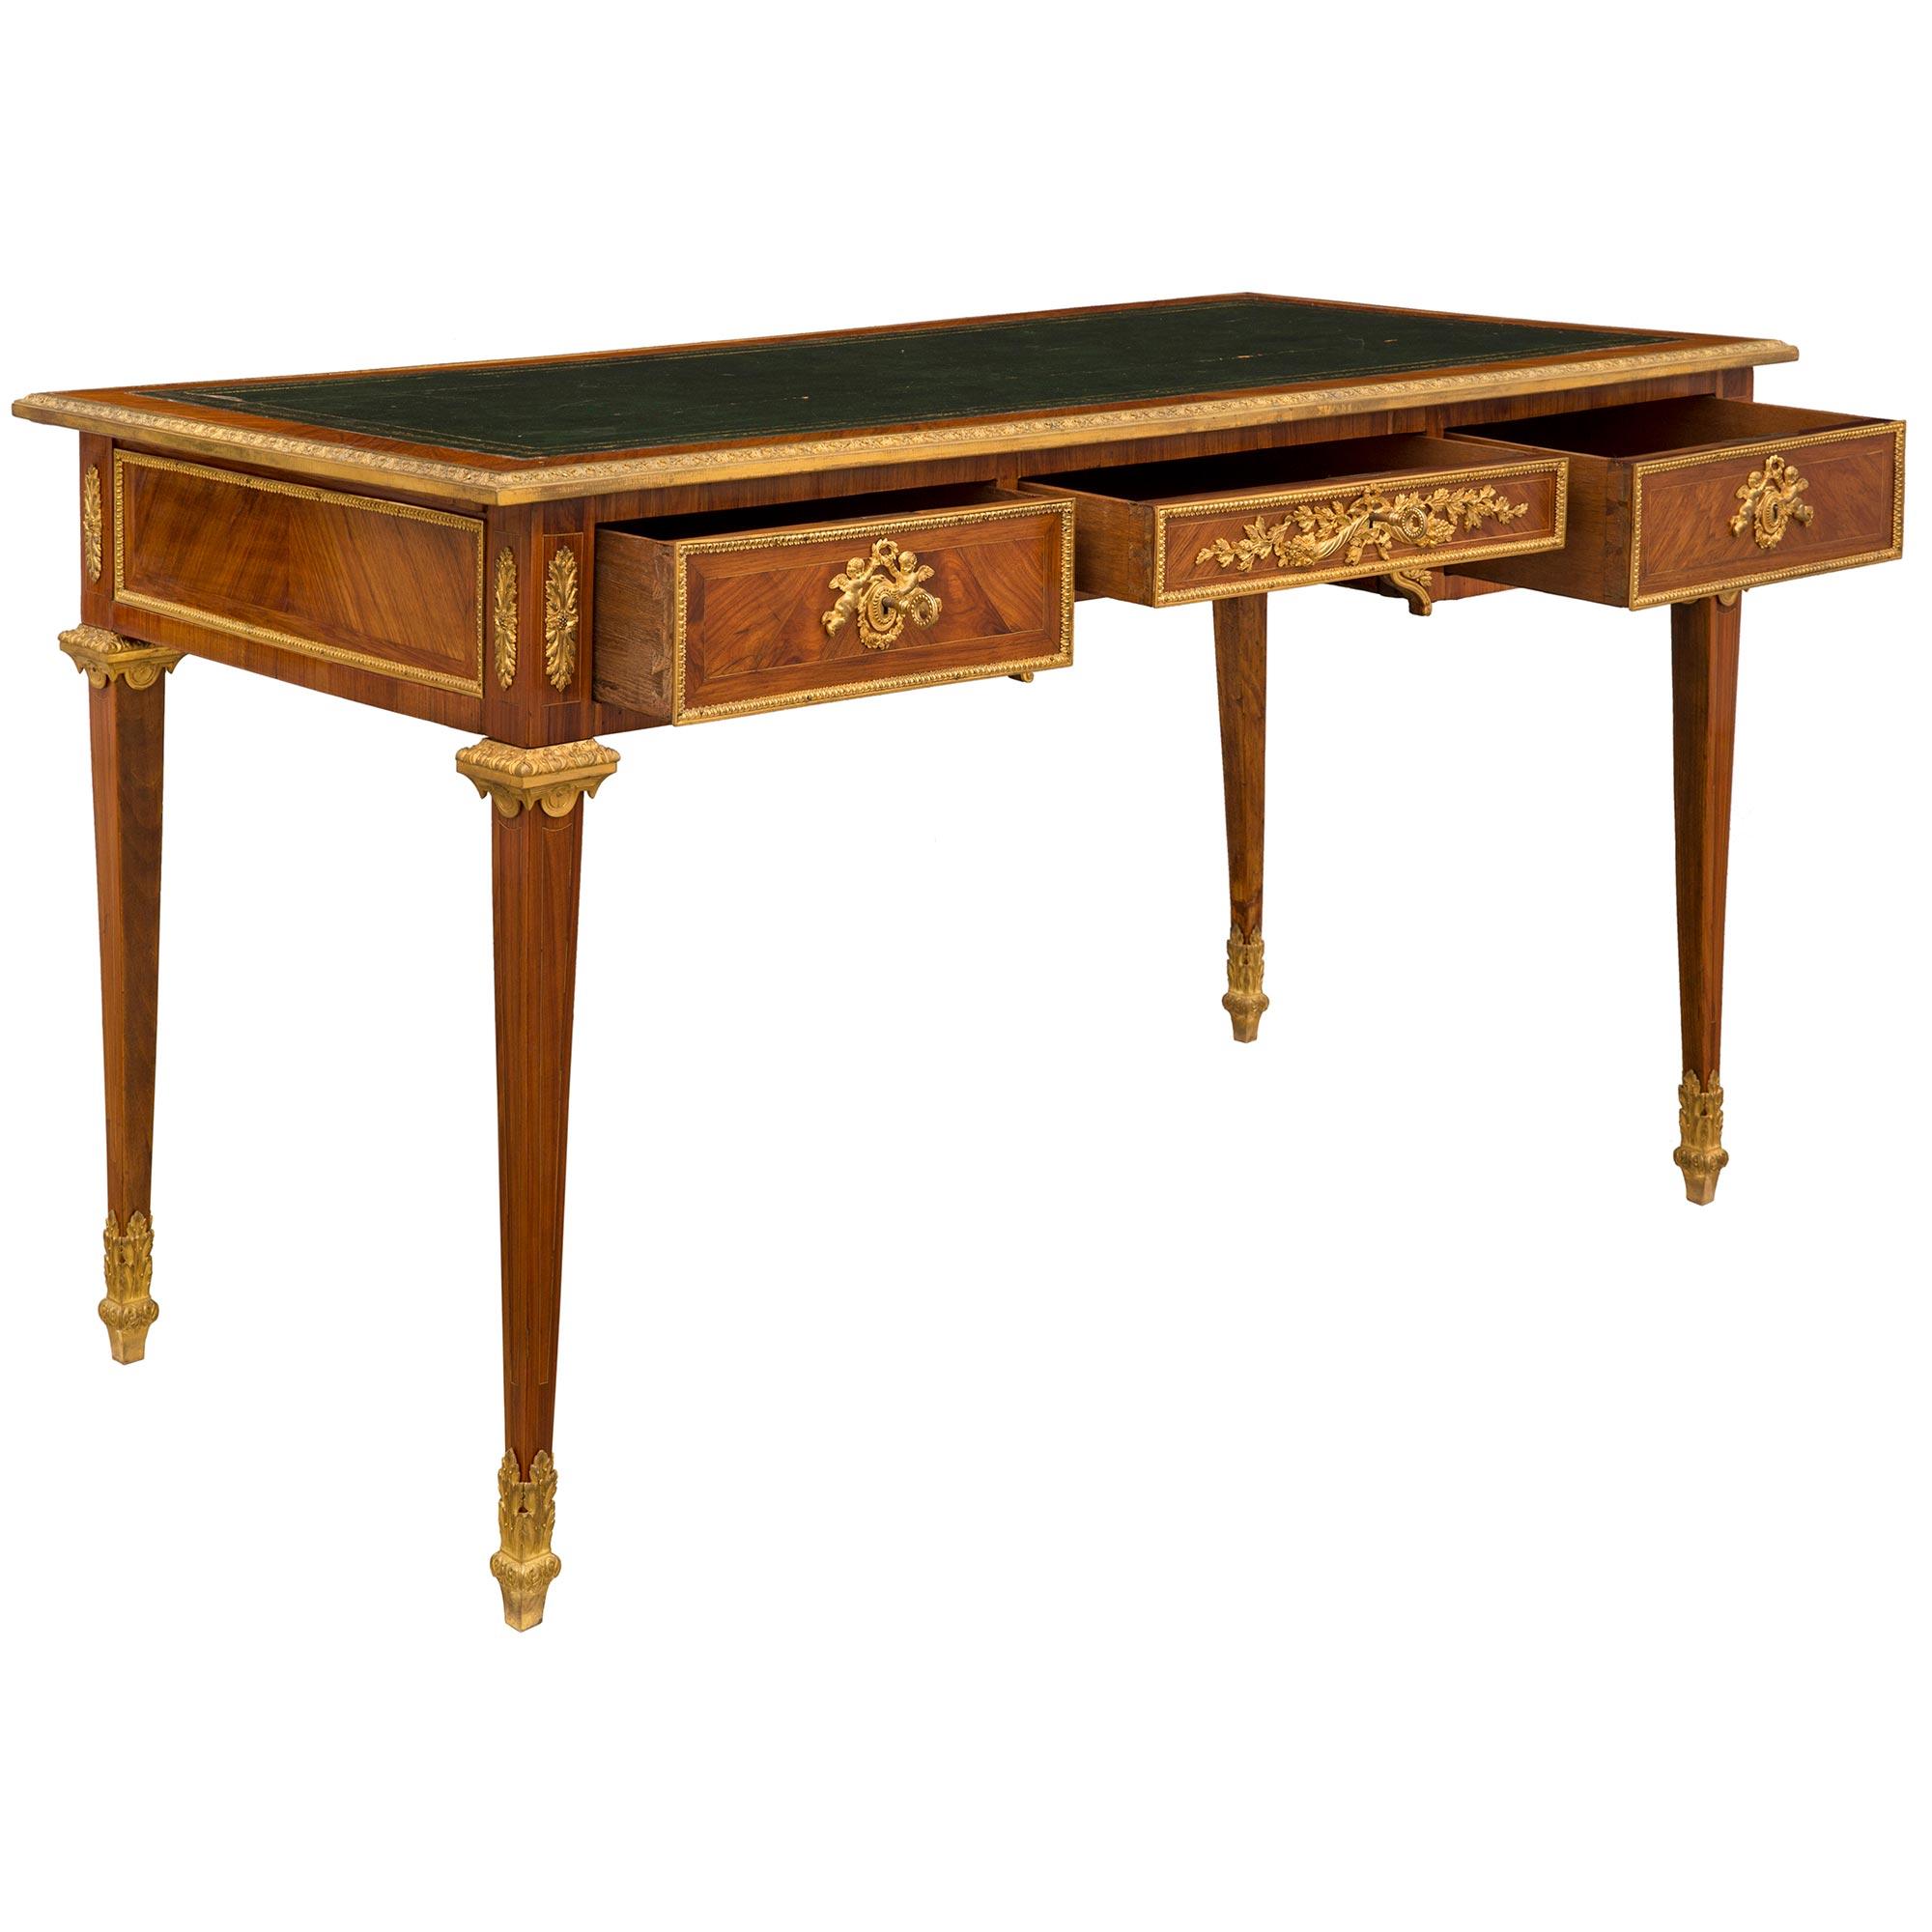 18th Century and Earlier Mid 18th Century French Louis XVI Period Tulipwood and Ormolu Bureau Plat For Sale